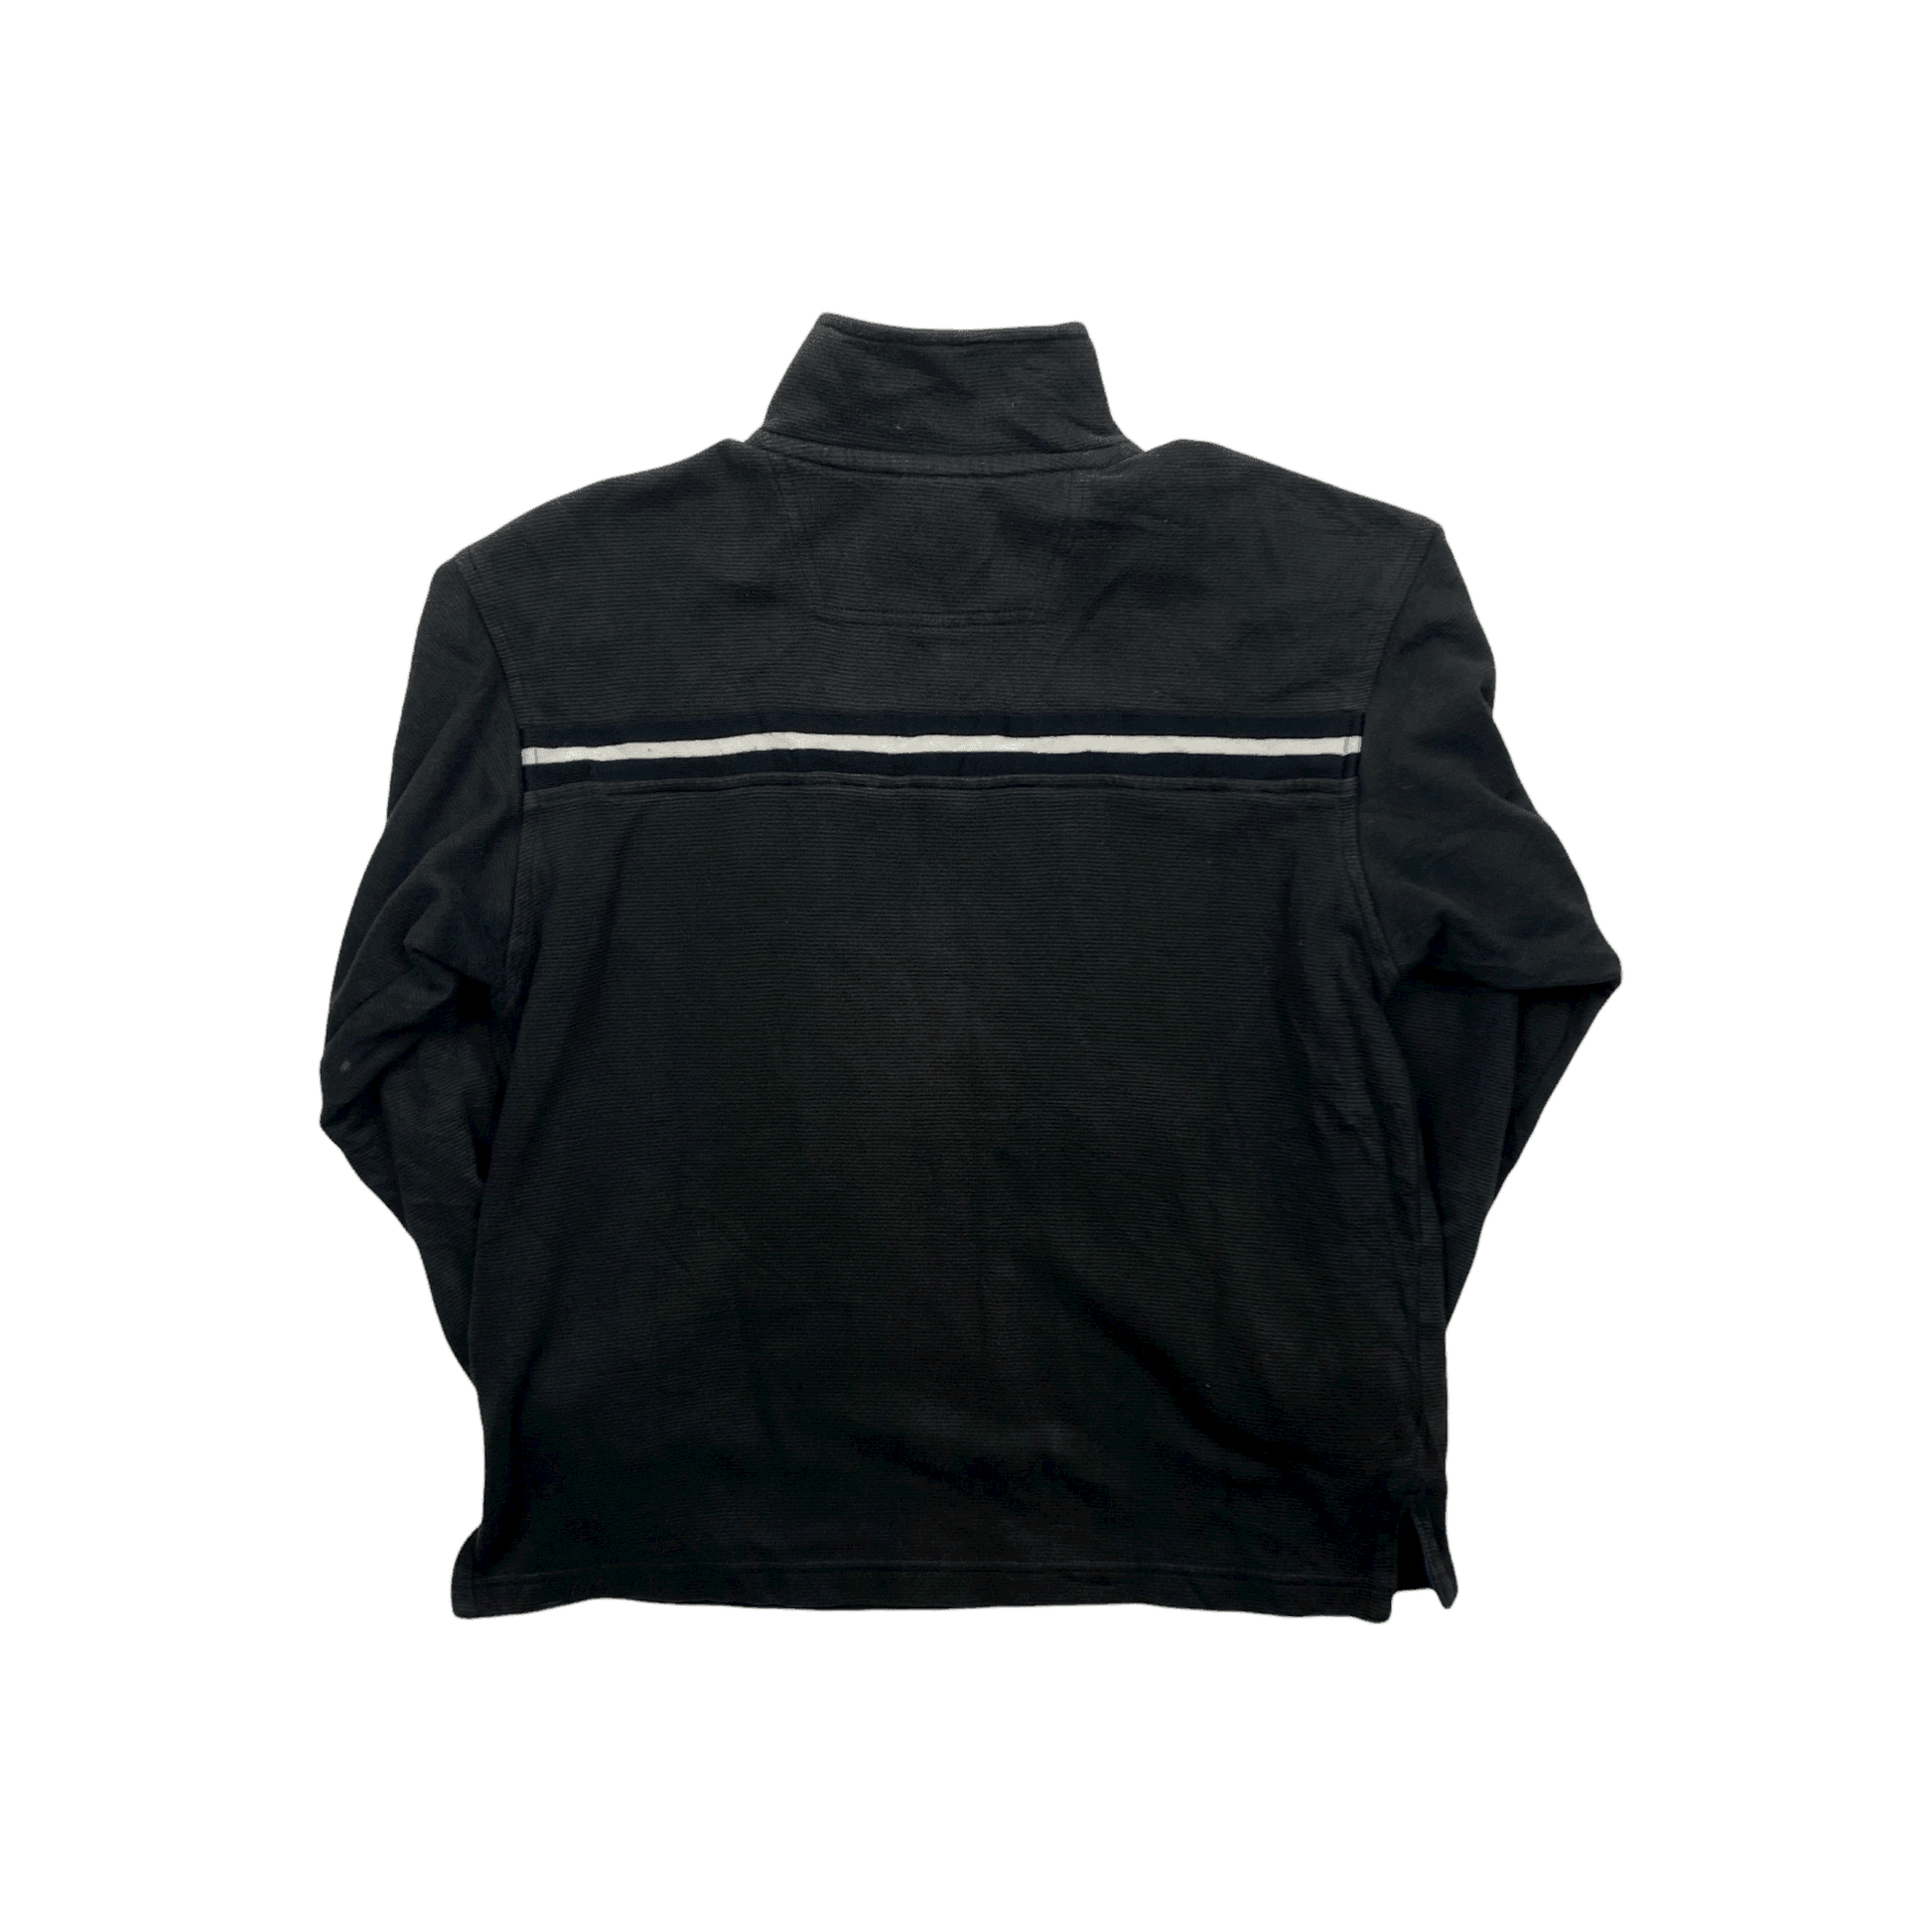 Vintage 90s Black Nike Spell-Out Quarter Zip Sweatshirt - Recommended Size - Small - The Streetwear Studio